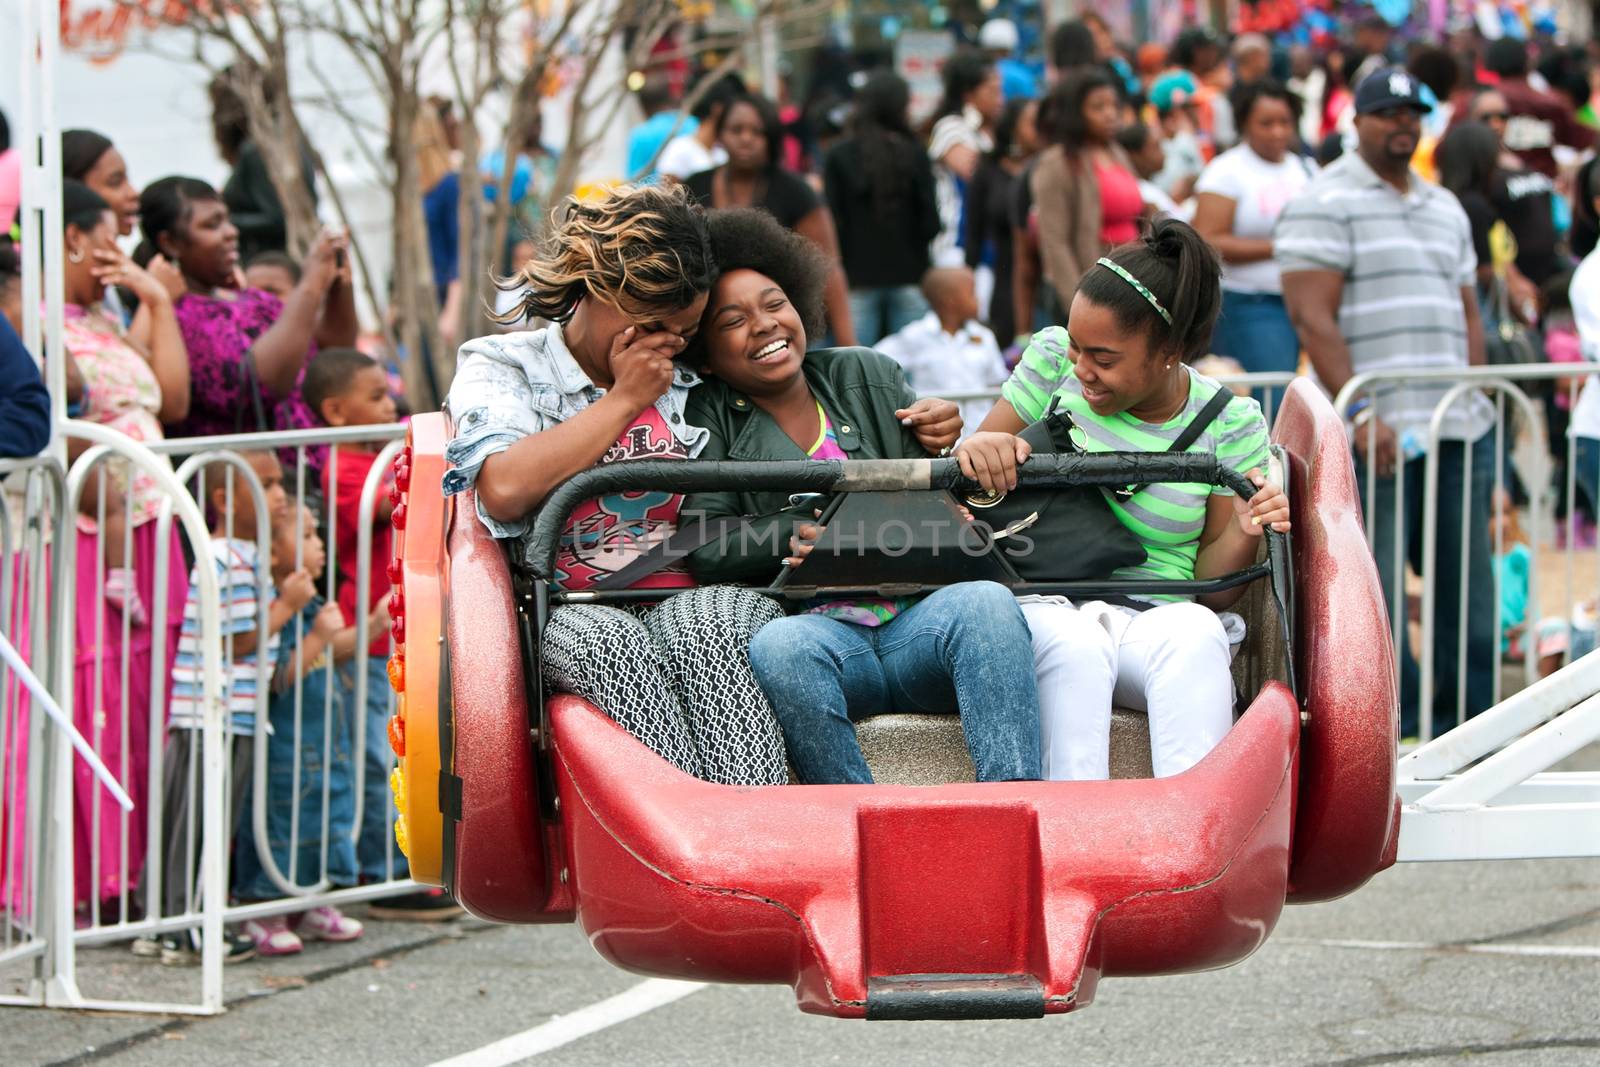 Women Laugh While Riding Carnival Ride by BluIz60